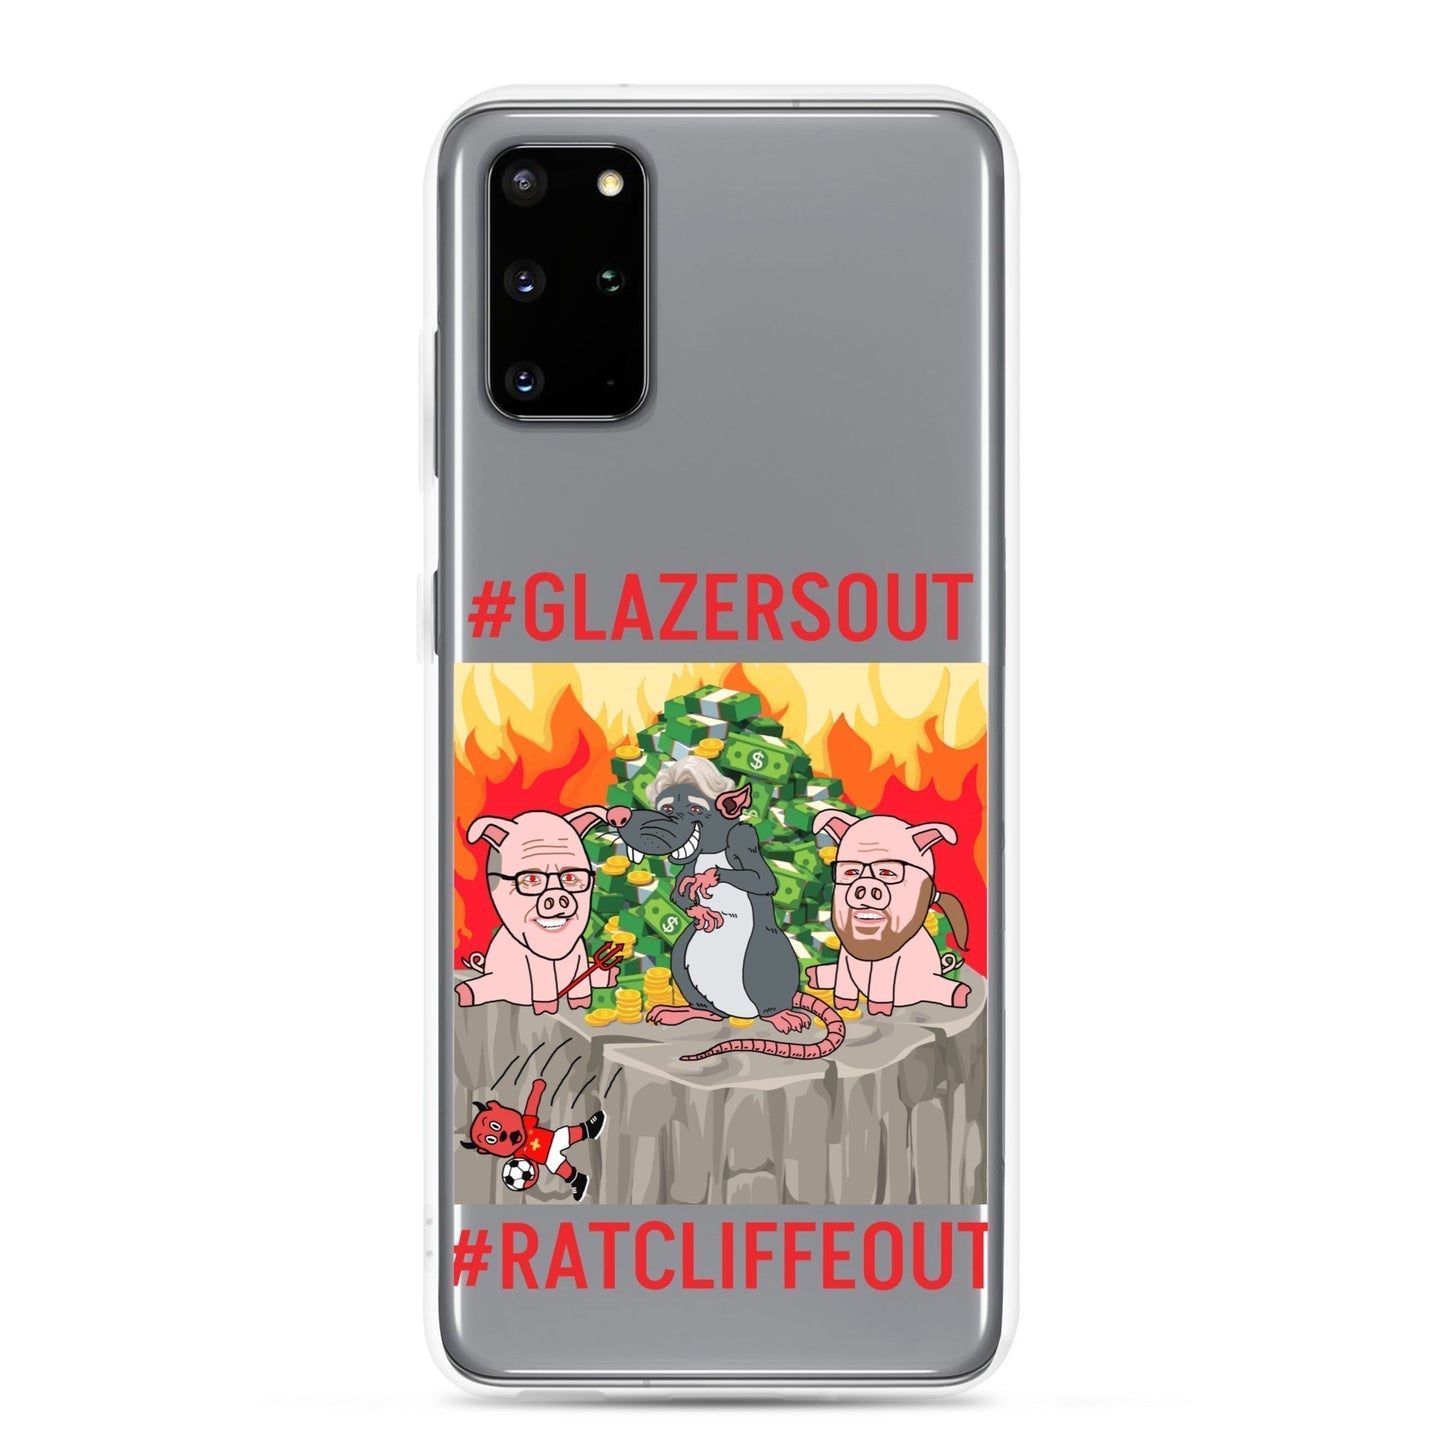 Manchester United Ratcliffe Out, Glazers Out Clear Phone Case for Samsung® Next Cult Brand Football, GlazersOut, Manchester United, RatcliffeOut